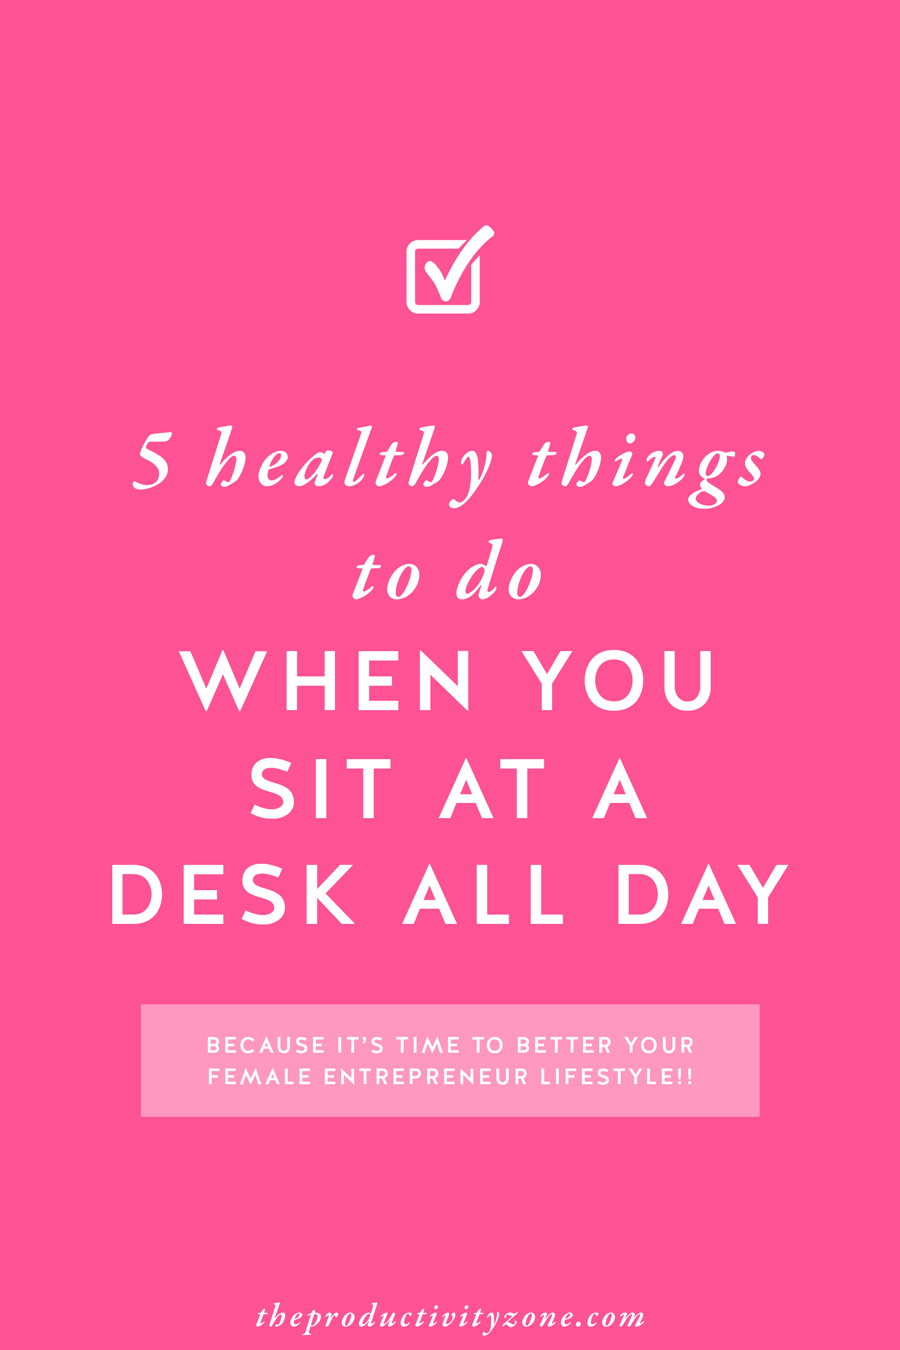 Small, healthy changes can and will better your female entrepreneur lifestyle if you practice them consistently for a long period of time. Over on The Productivity Zone, I suggest 5 healthy things you can do when you sit at a desk all day (and not one of them involves kale)!!